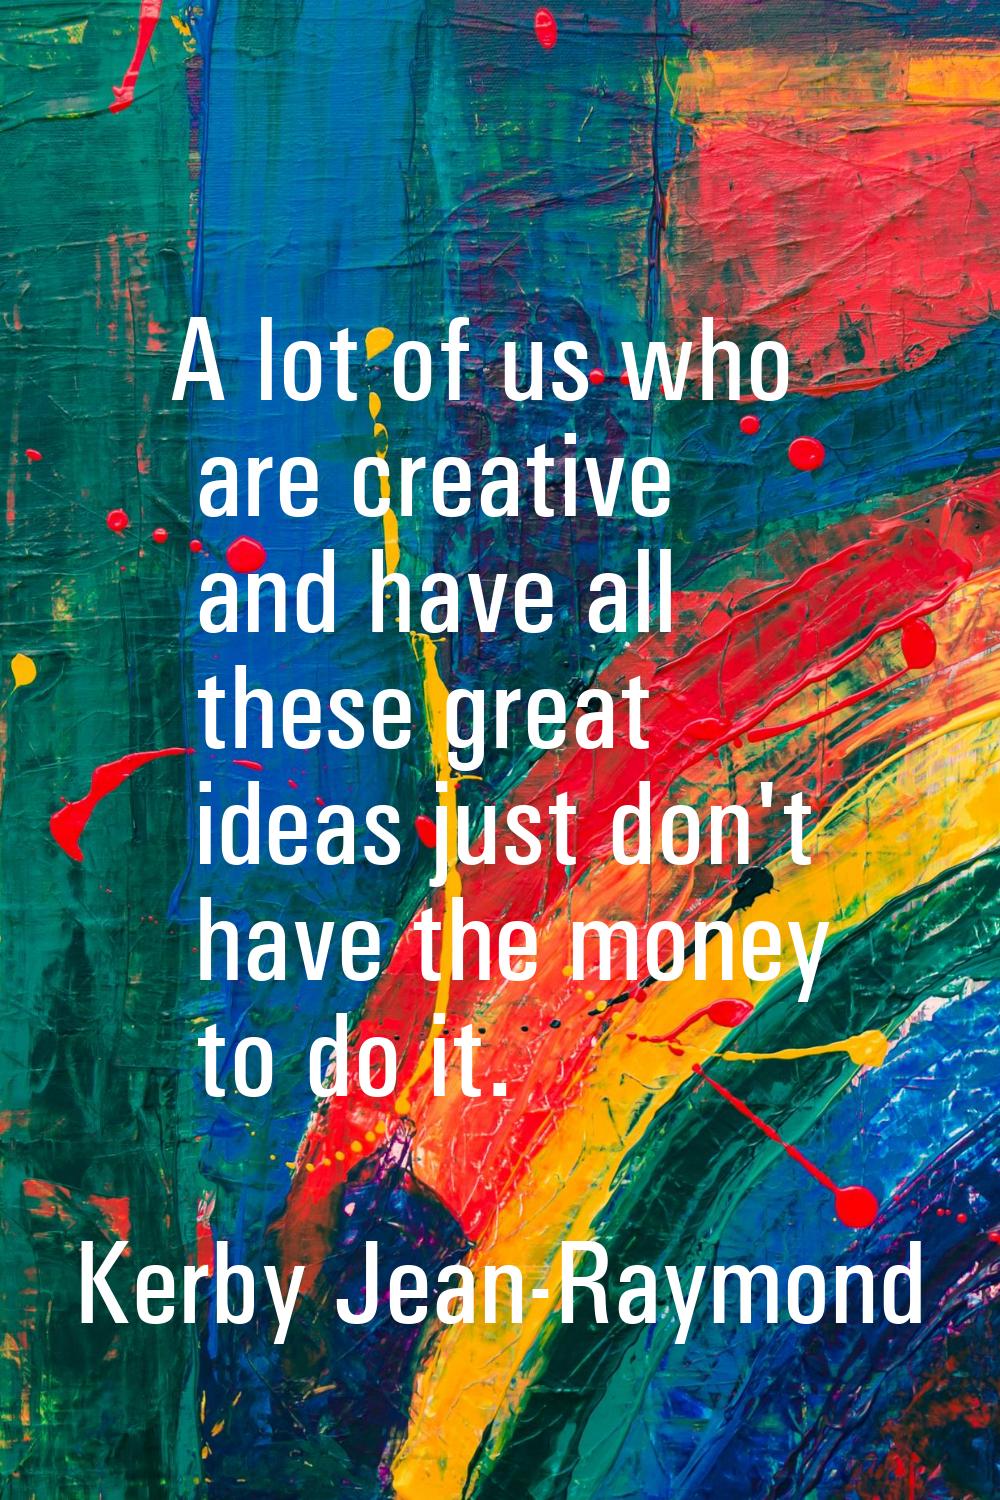 A lot of us who are creative and have all these great ideas just don't have the money to do it.